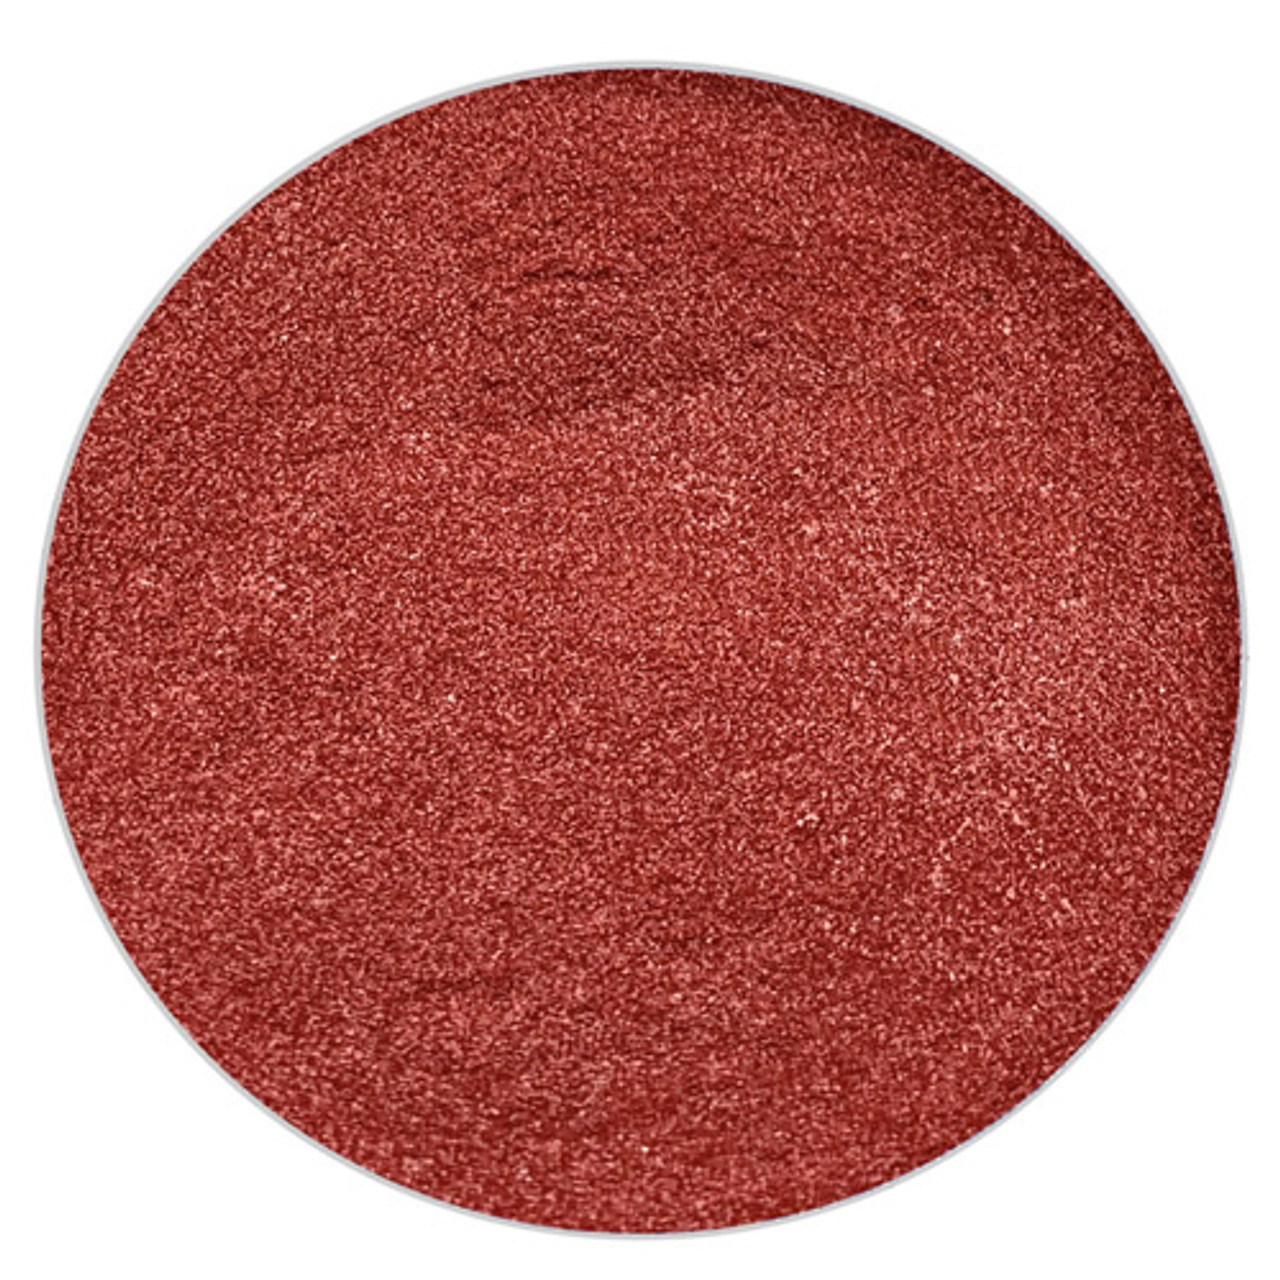 Ultimate Baker Natural Red Food Color (1x12g), food natural colorant, luster dust, cake color